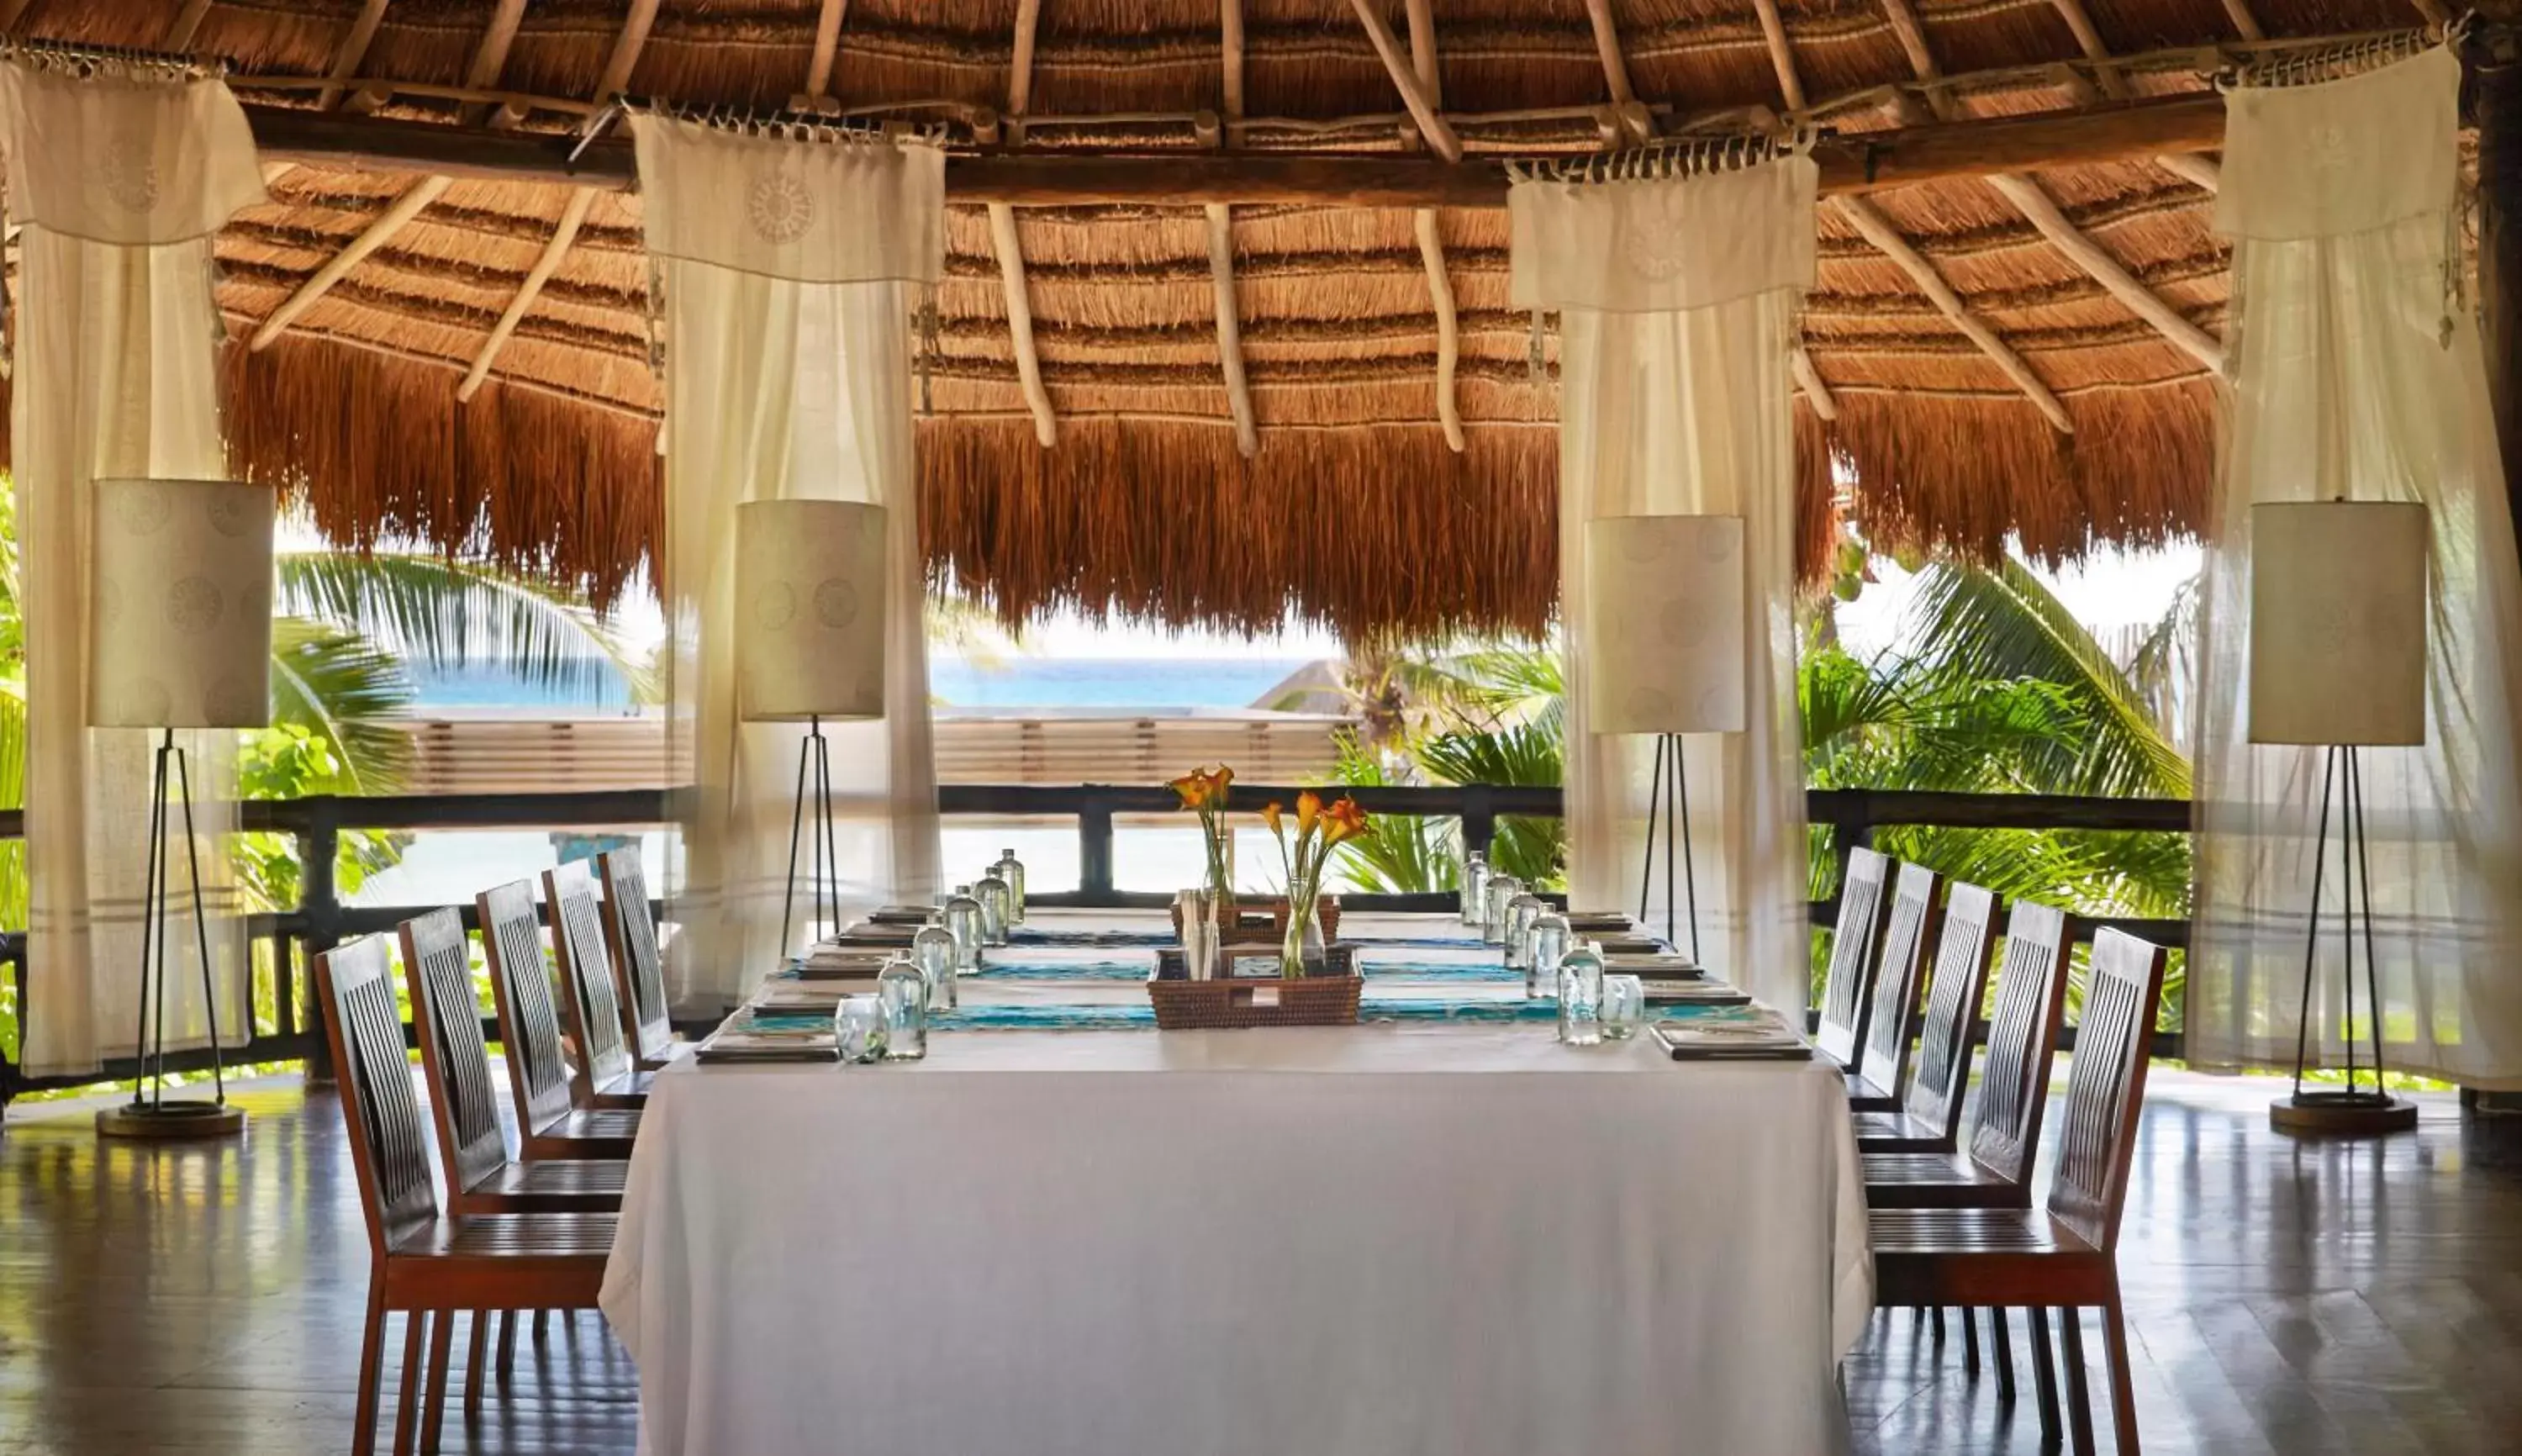 Meeting/conference room, Restaurant/Places to Eat in Viceroy Riviera Maya, a Luxury Villa Resort